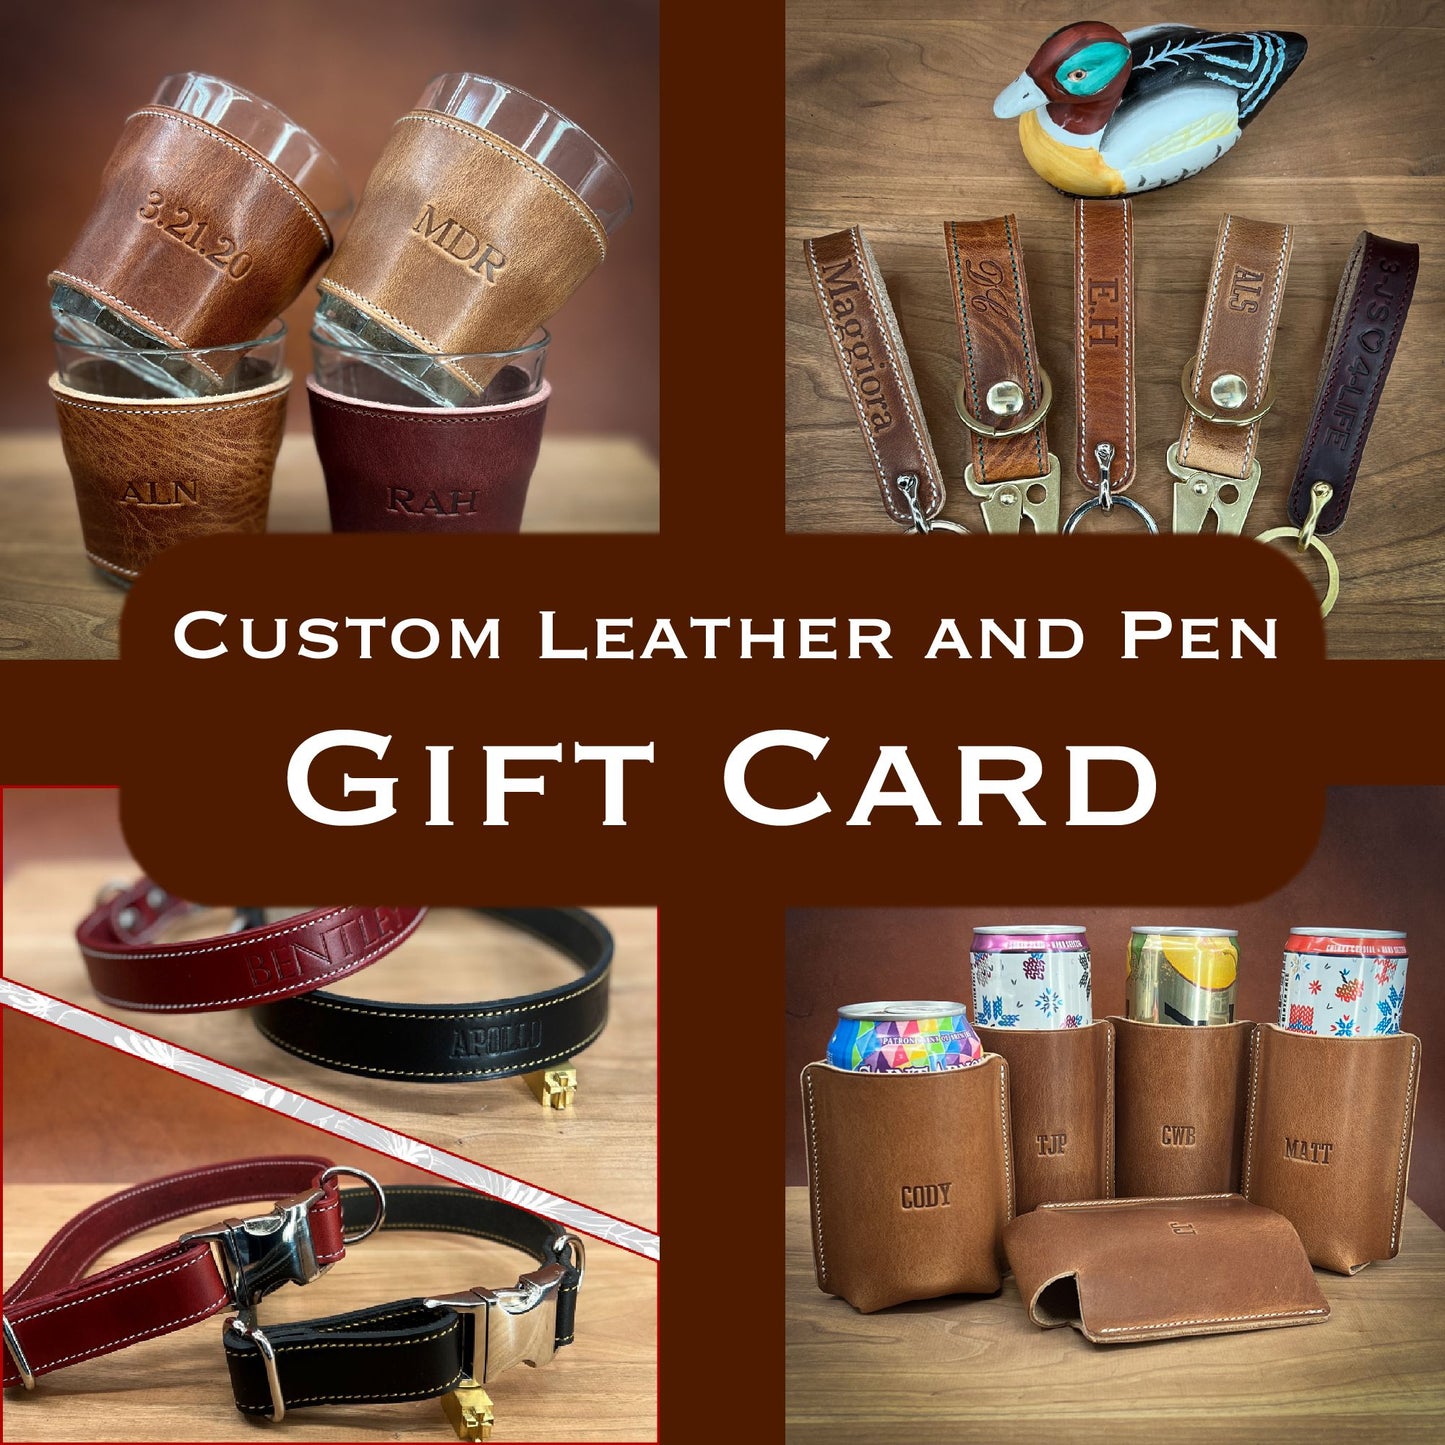 Custom Leather and Pen Gift Card